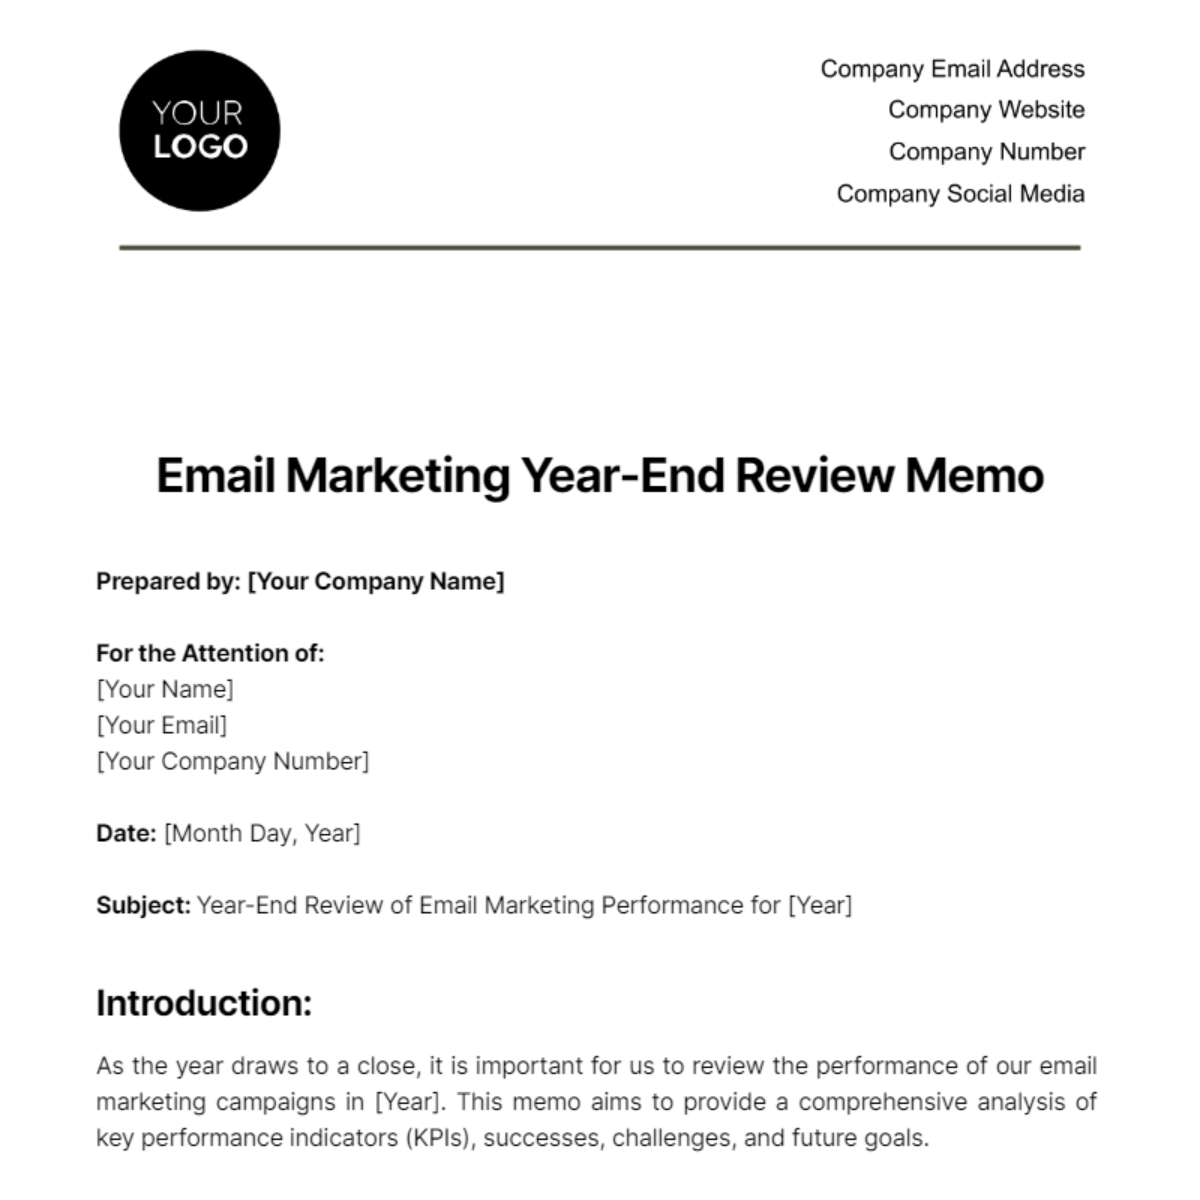 Email Marketing Year-End Review Memo Template